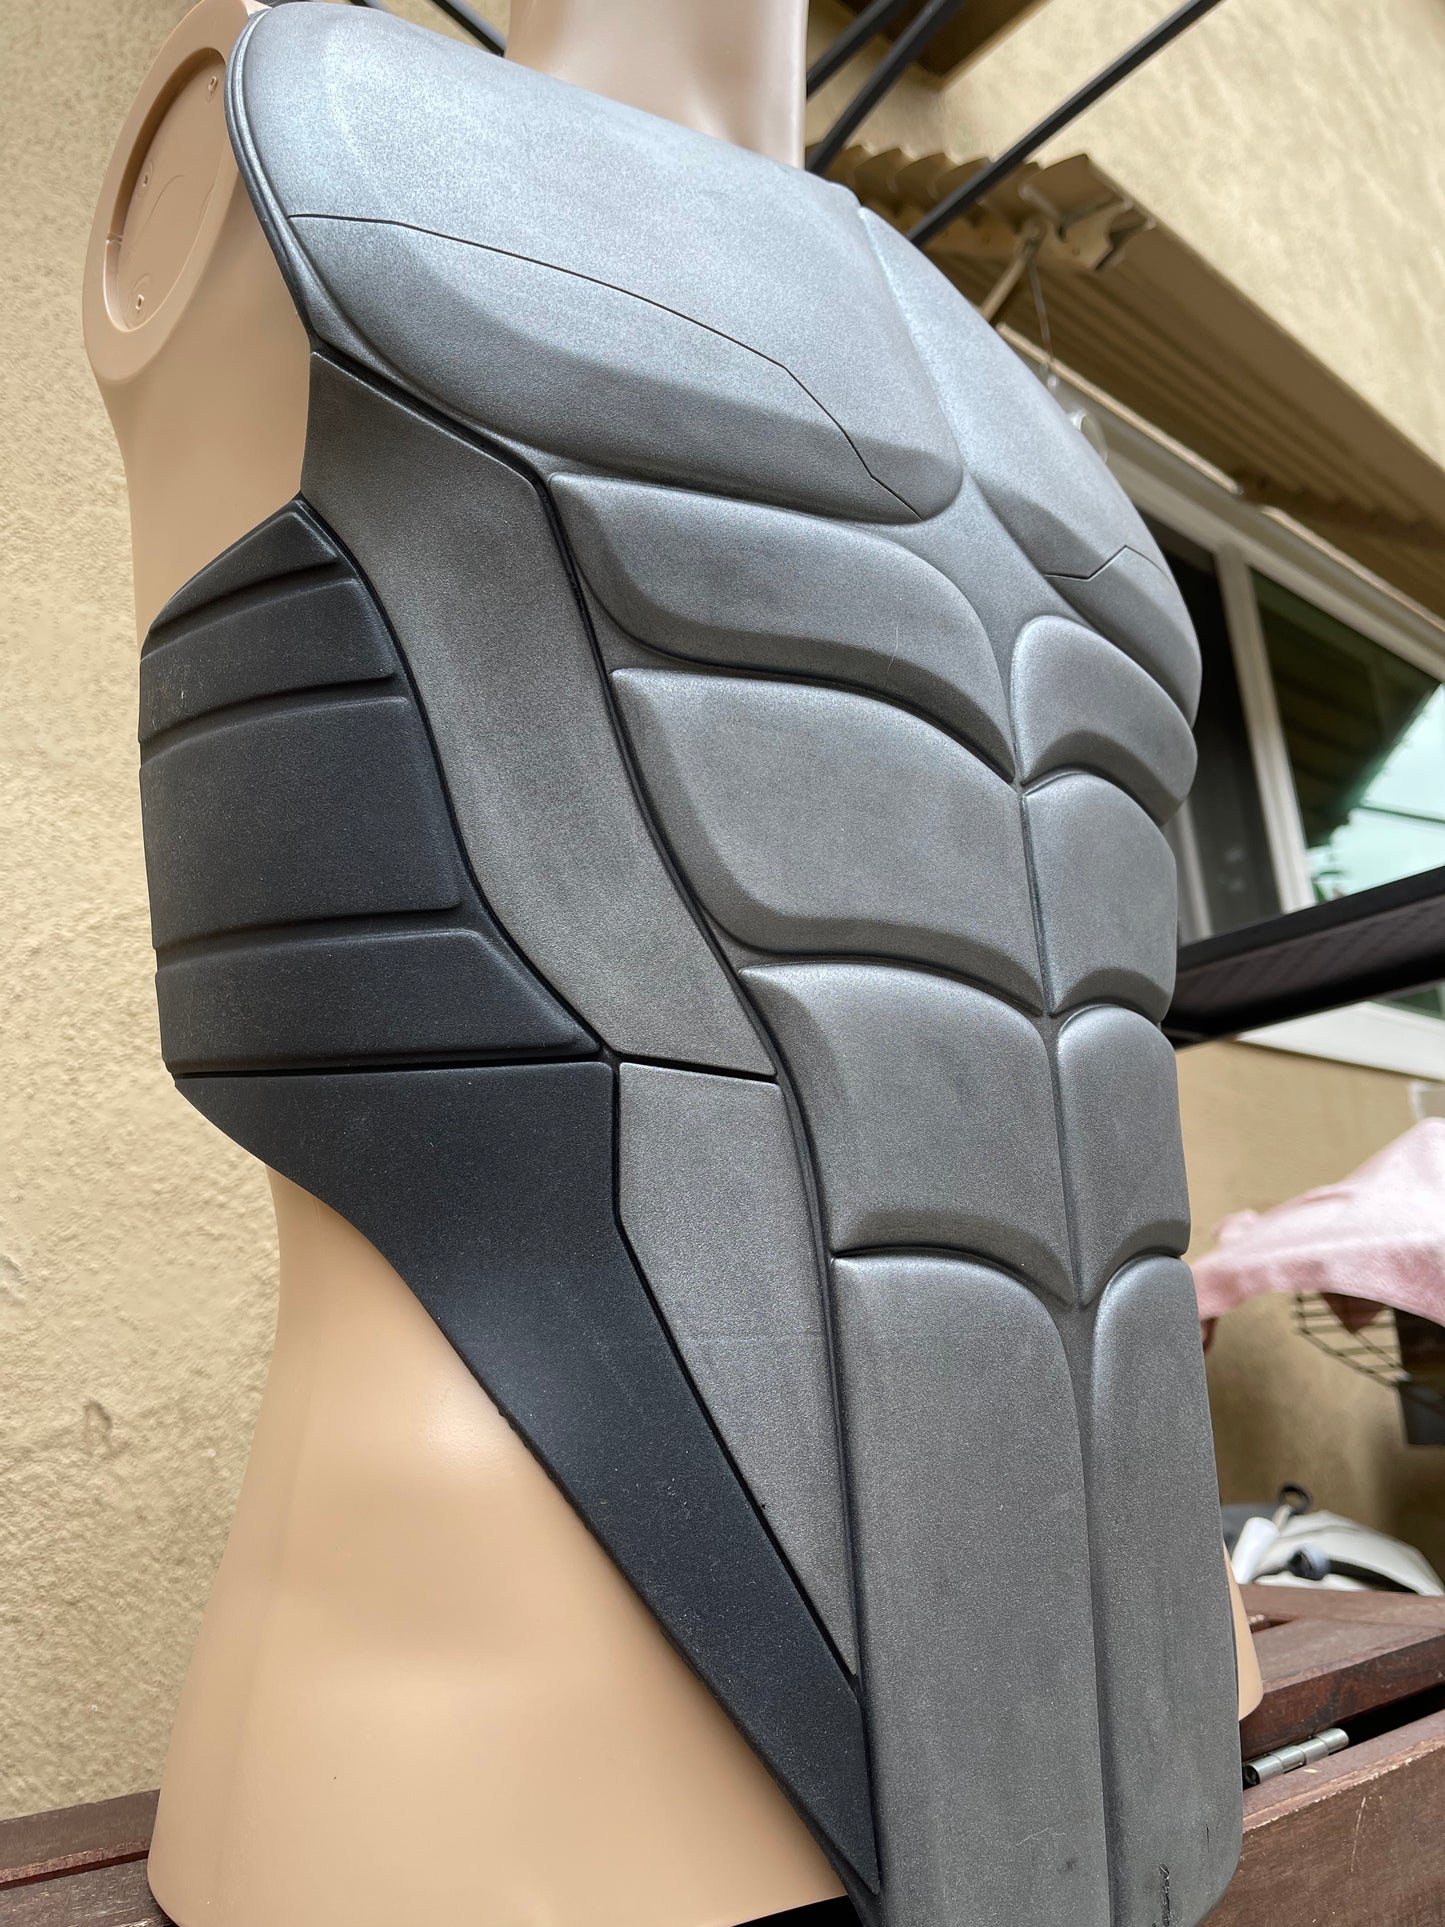 “The Champion” - Urethane Cosplay Armor Vest v1 - Free shipping to continental US